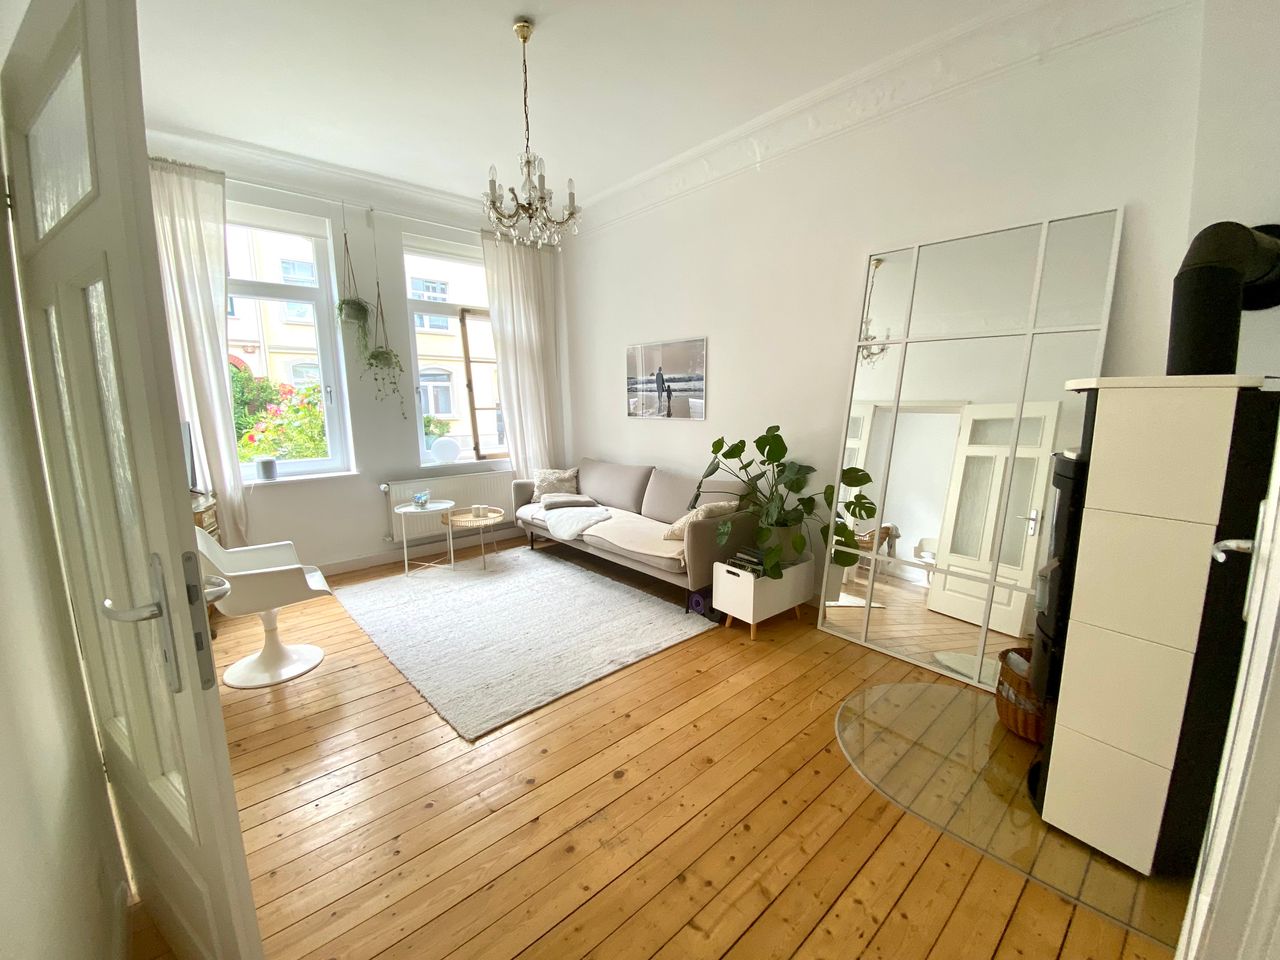 Bright old building flat close to the city centre with balcony, garden and fireplace